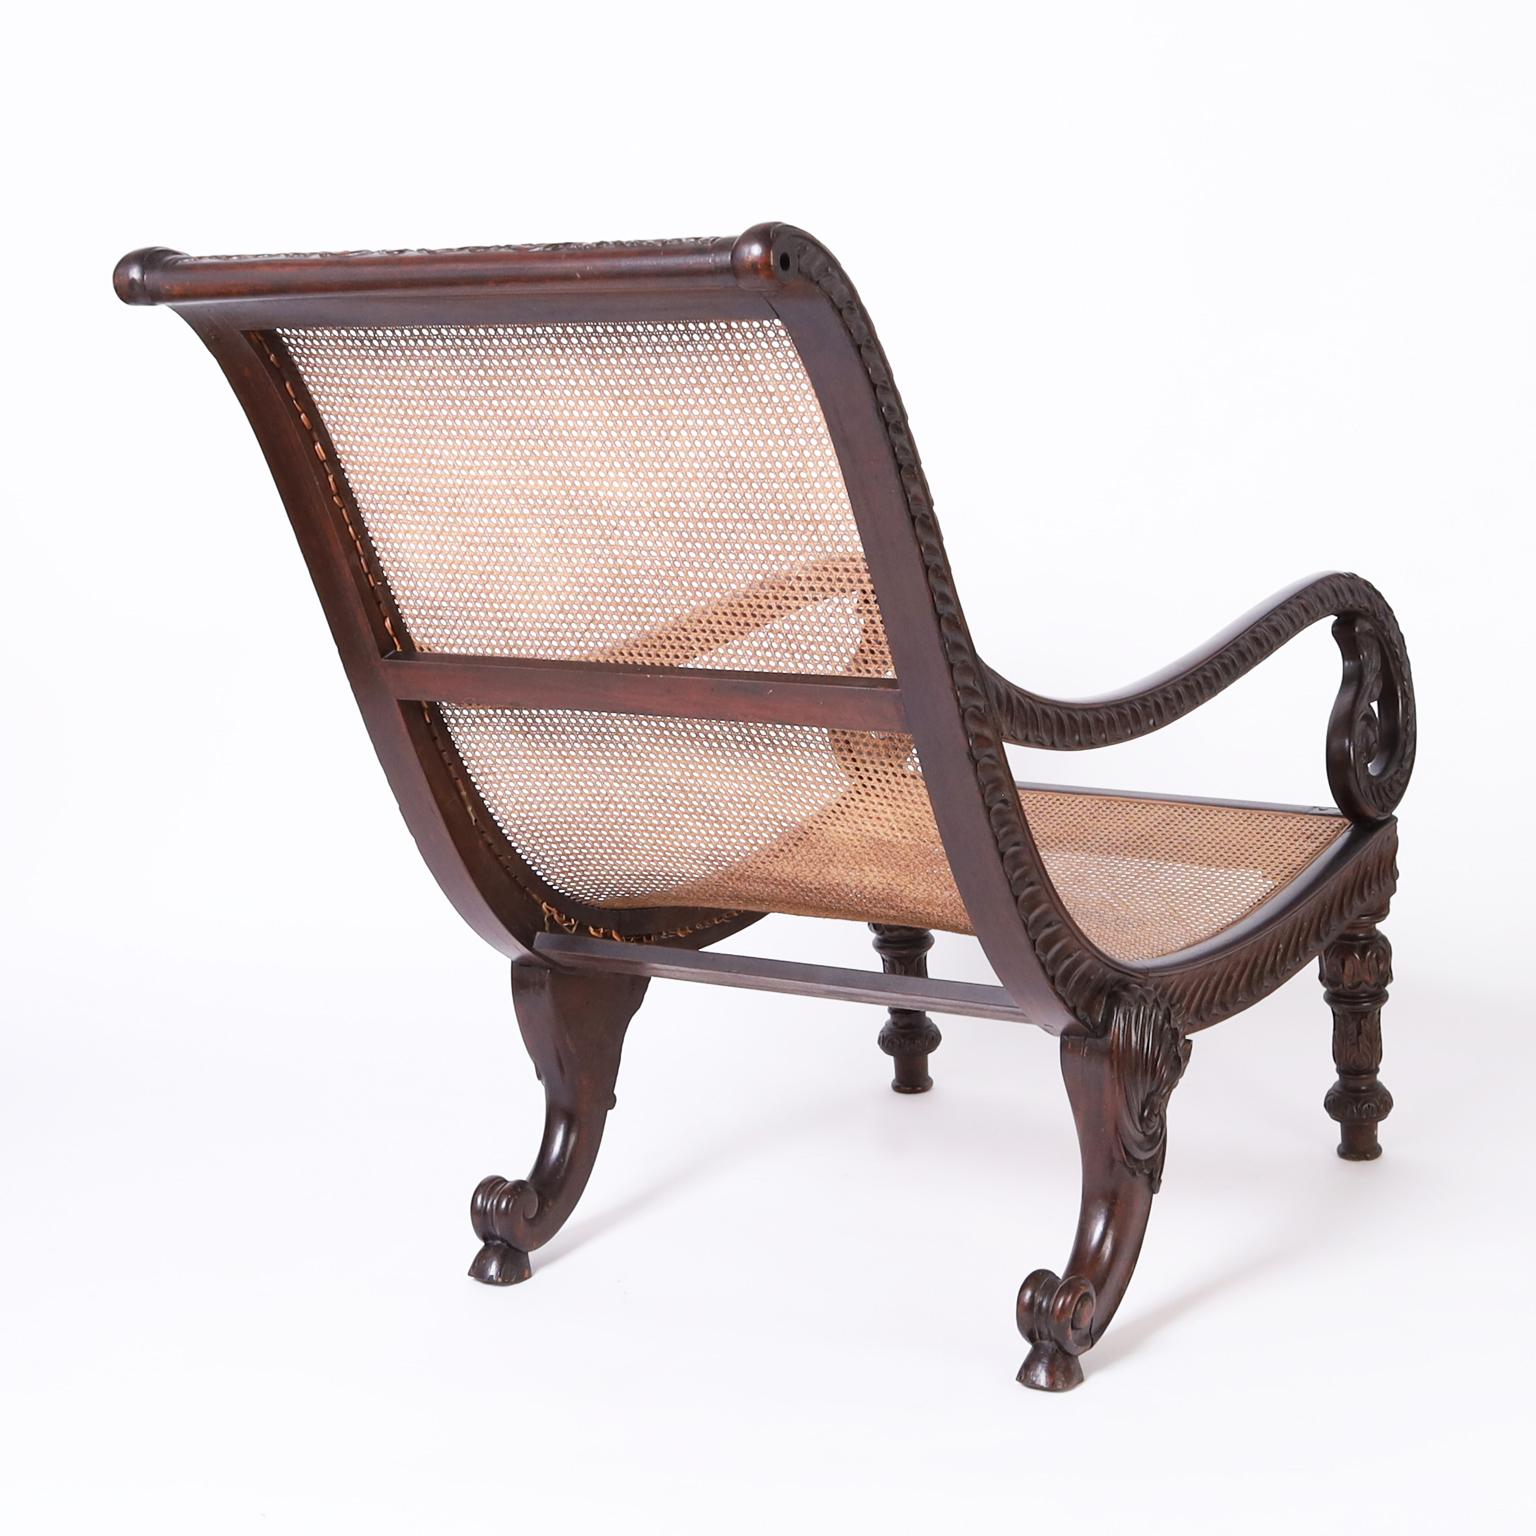 Caribbean Antique British Colonial Caned and Carved Planters Chair For Sale